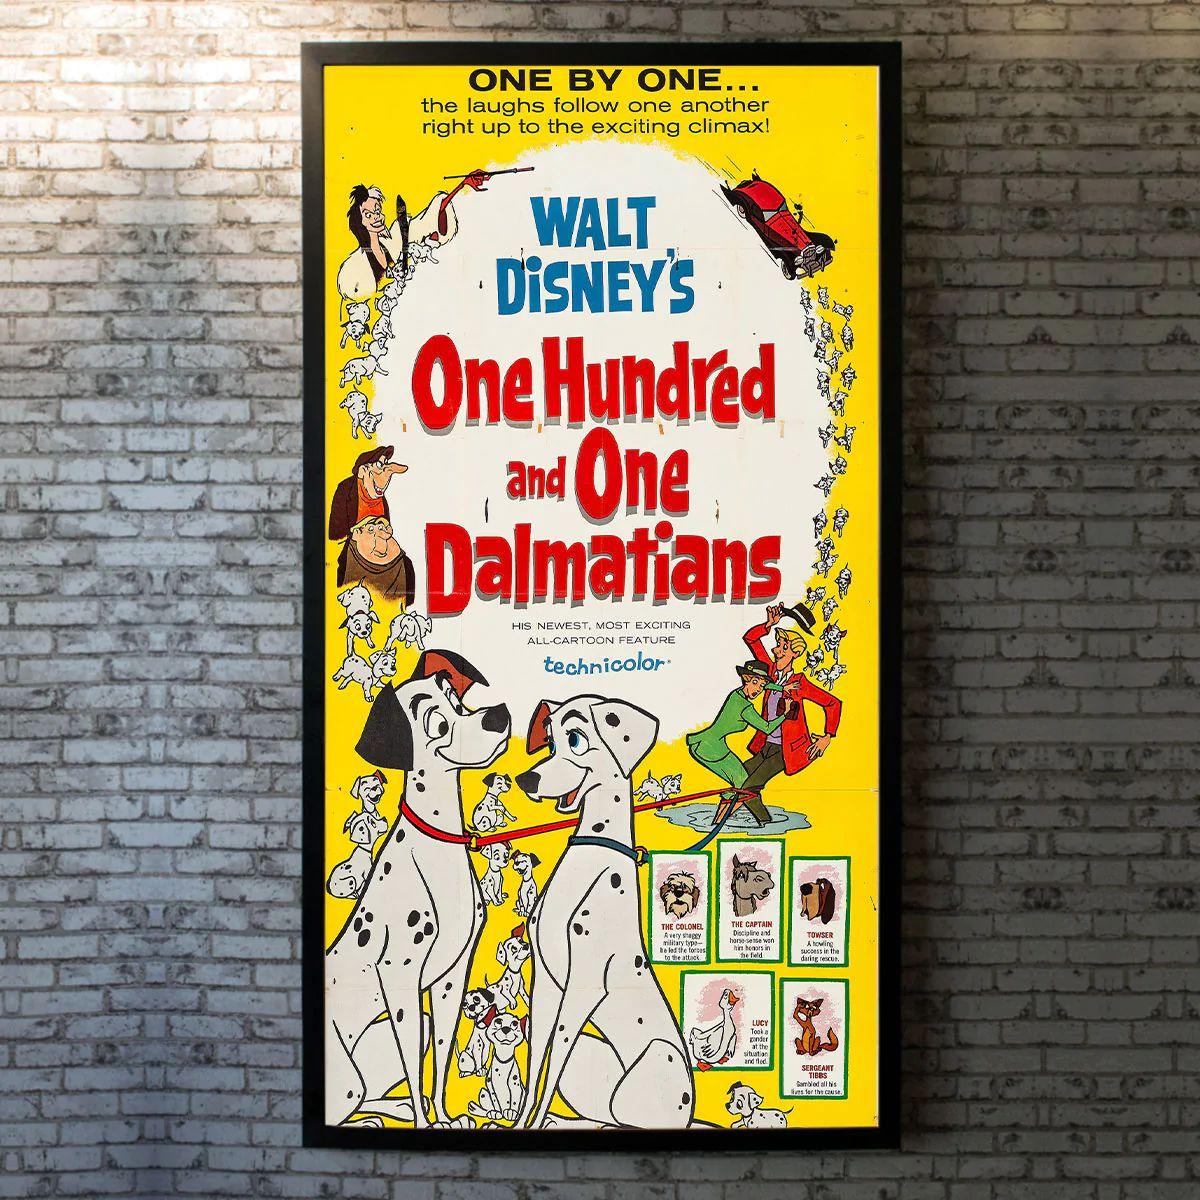 One Hundred and One Dalmatians / 101 Dalmatians, Unframed Poster, 1961

Three Sheet (41 X 84 Inches). When a litter of Dalmatian puppies are abducted by the minions of Cruella de Vil, the parents must find them before she uses them for a diabolical